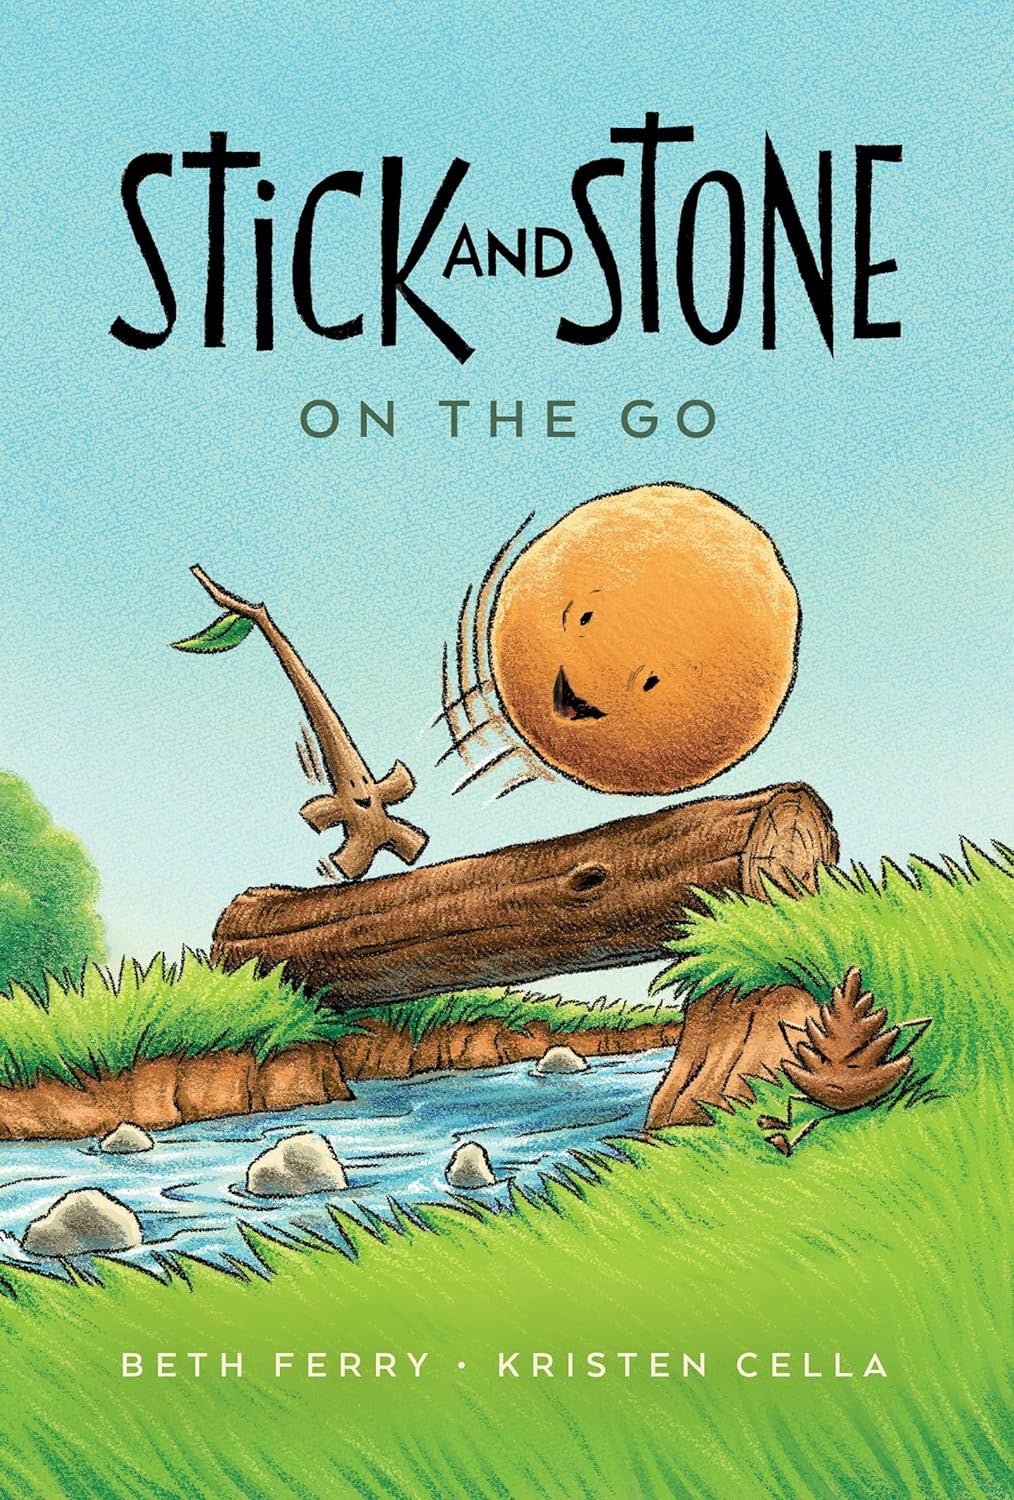 "Stick and Stone On the Go"